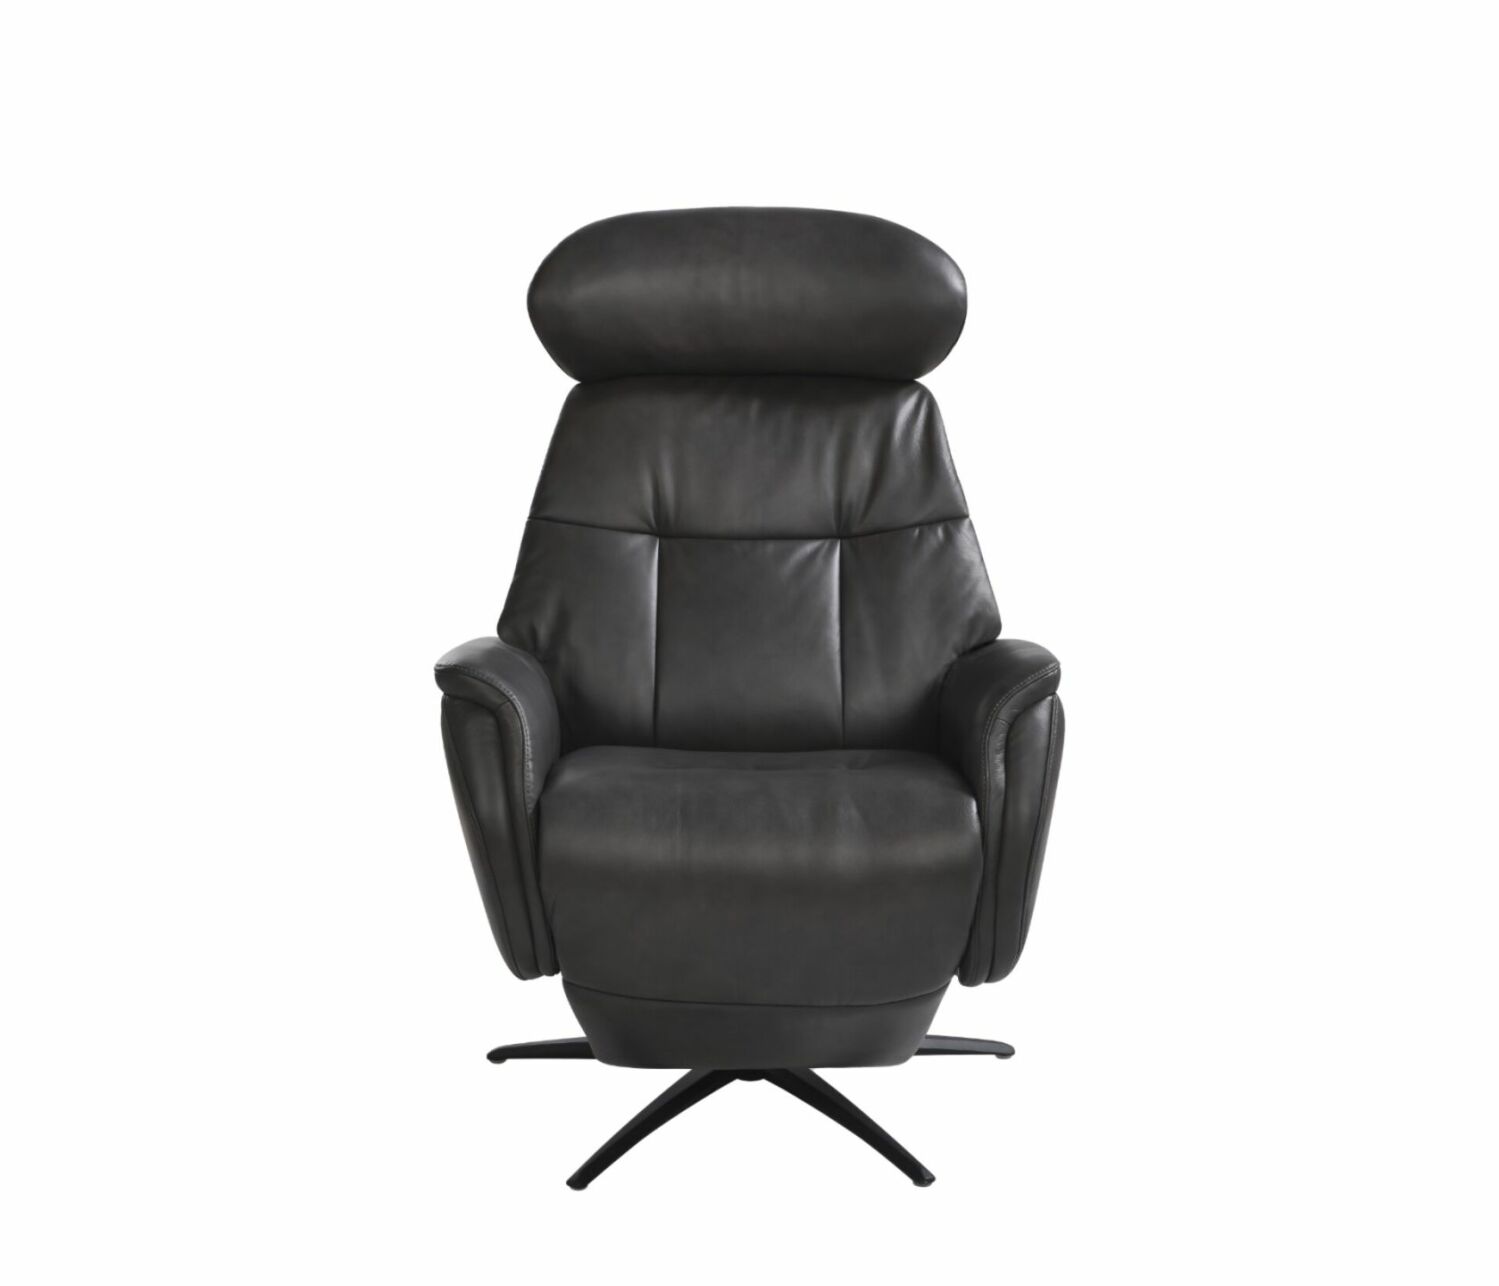 Altos All-in-One (Massage) Power Recliner with Heat